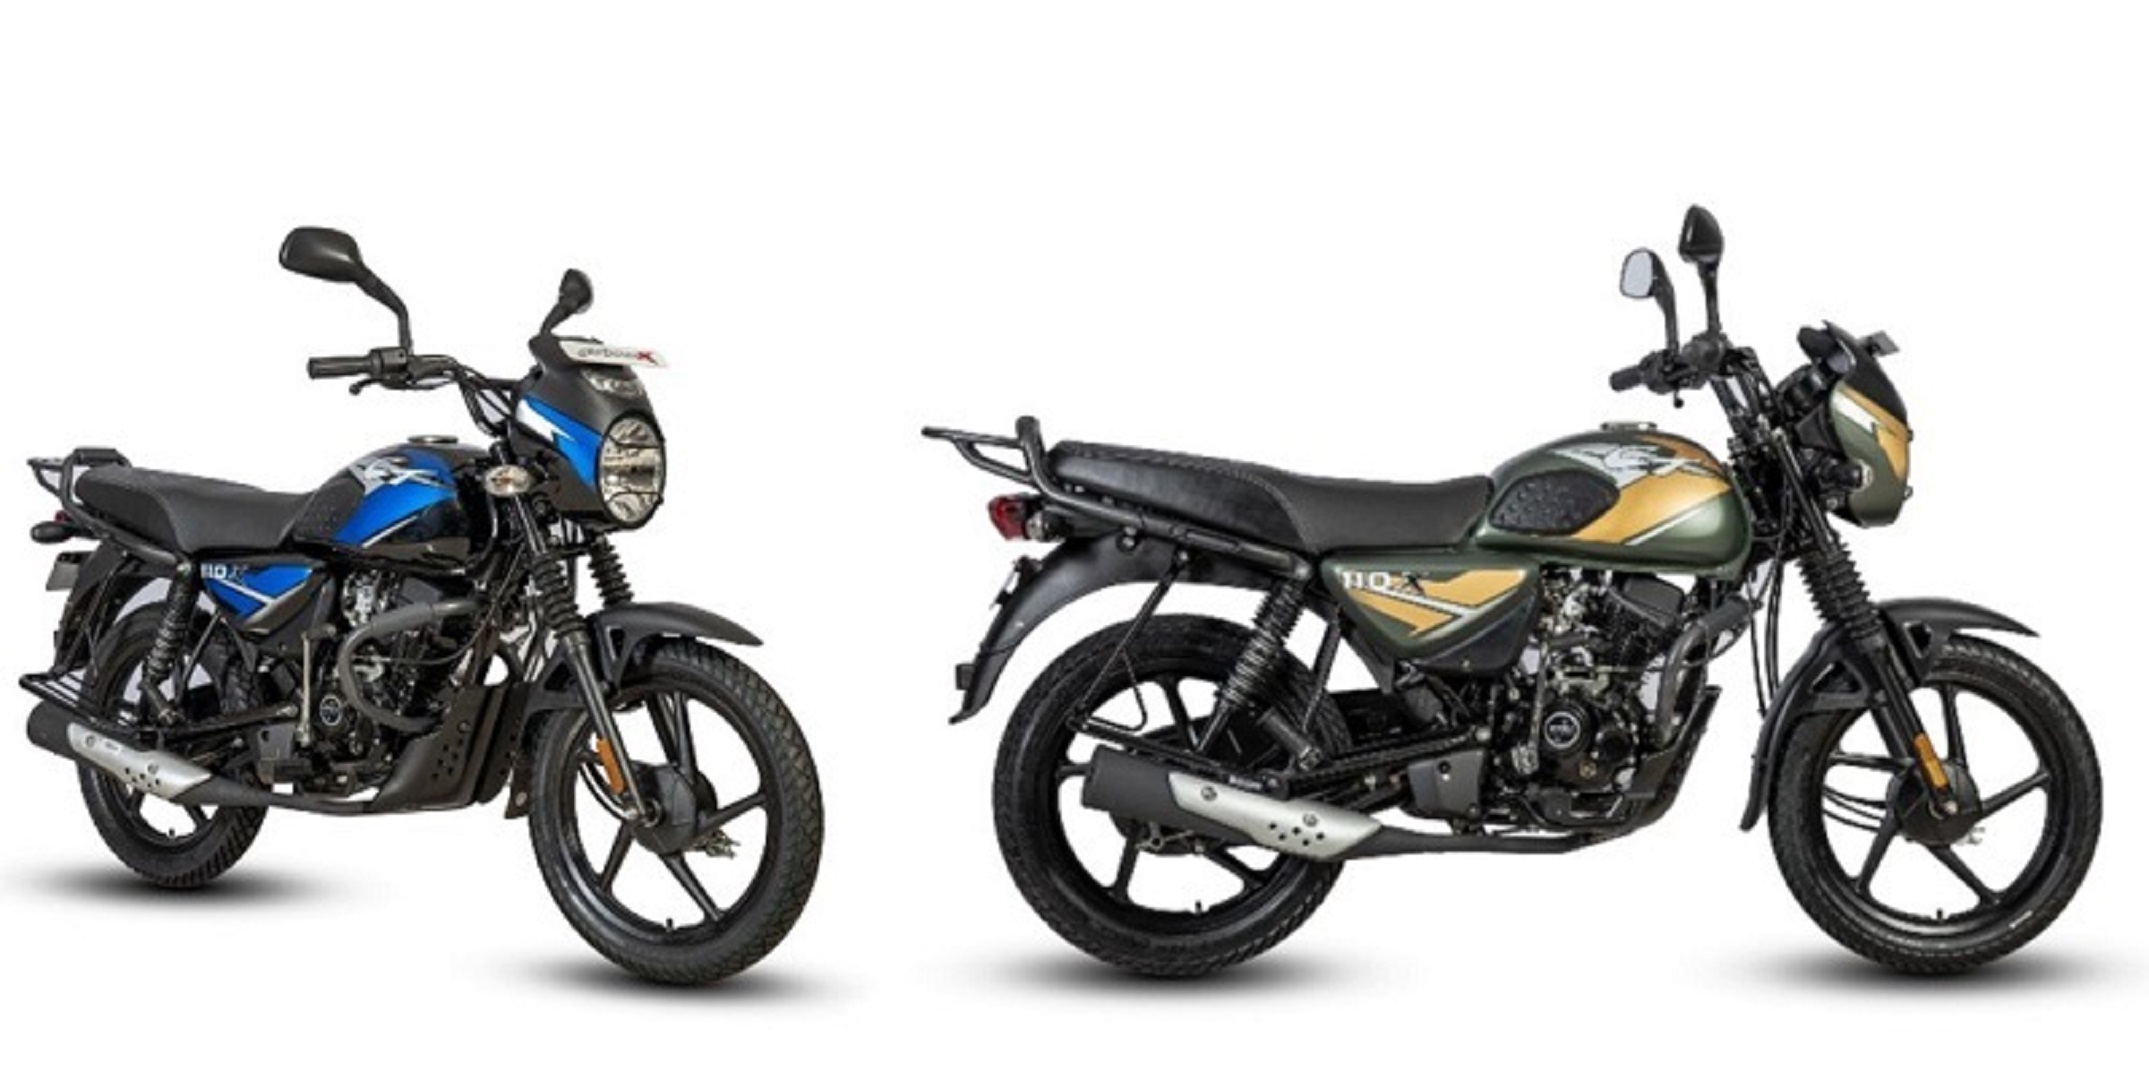 Bajaj Auto Launches Ct110x Priced At Rs 55 494 Products Suppliers Manufacturing Today India